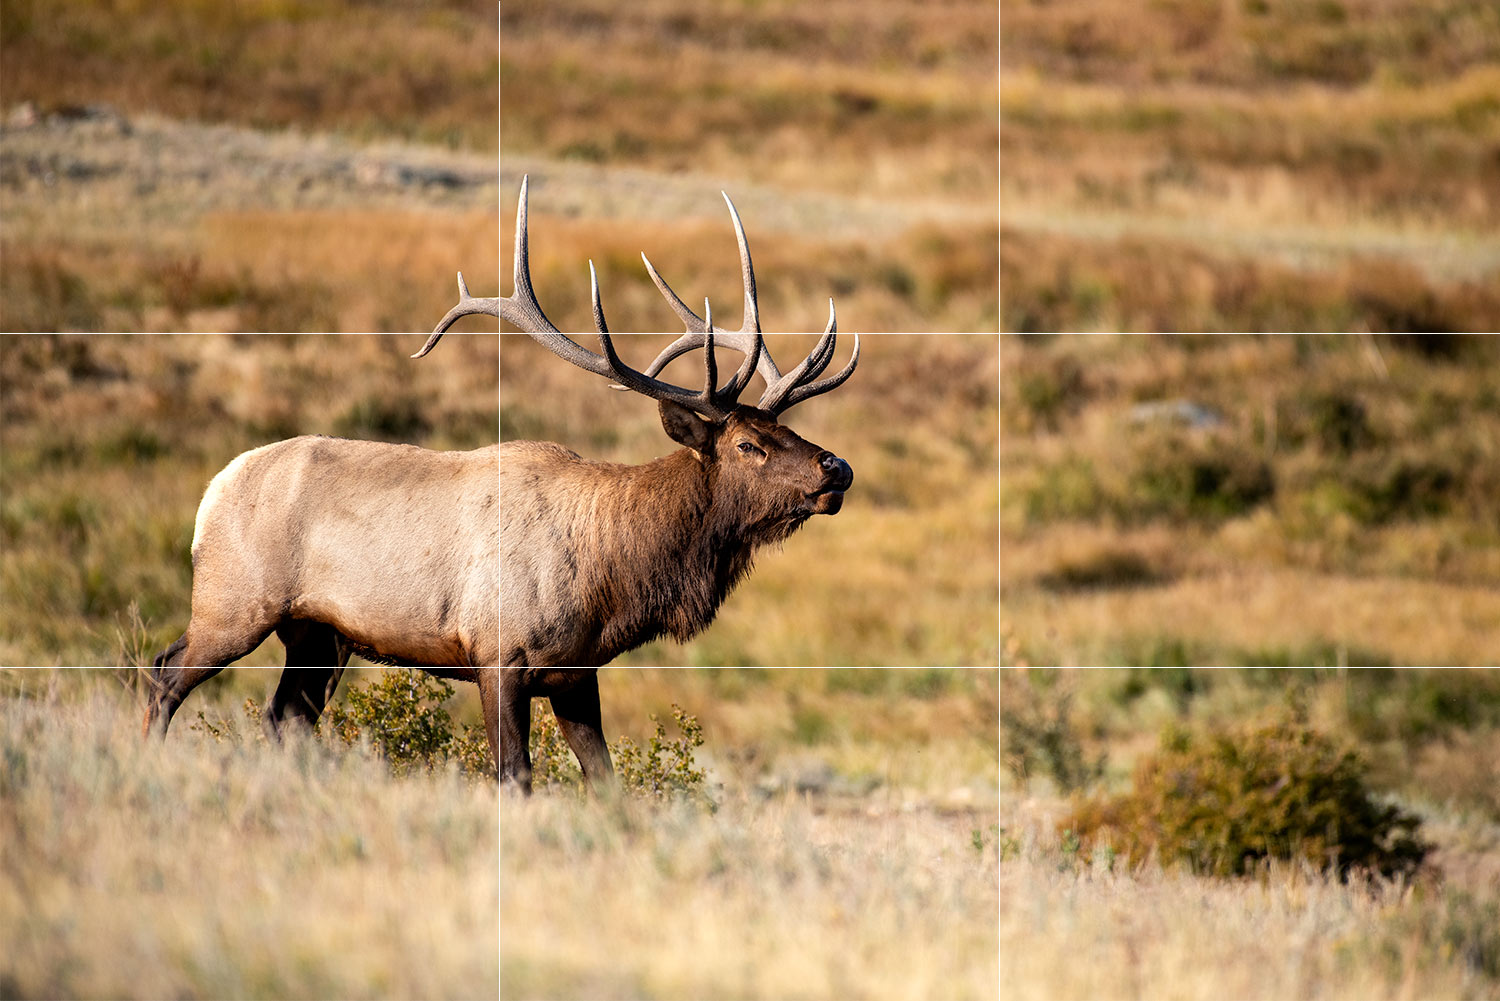 wildlife photography rule of thirds